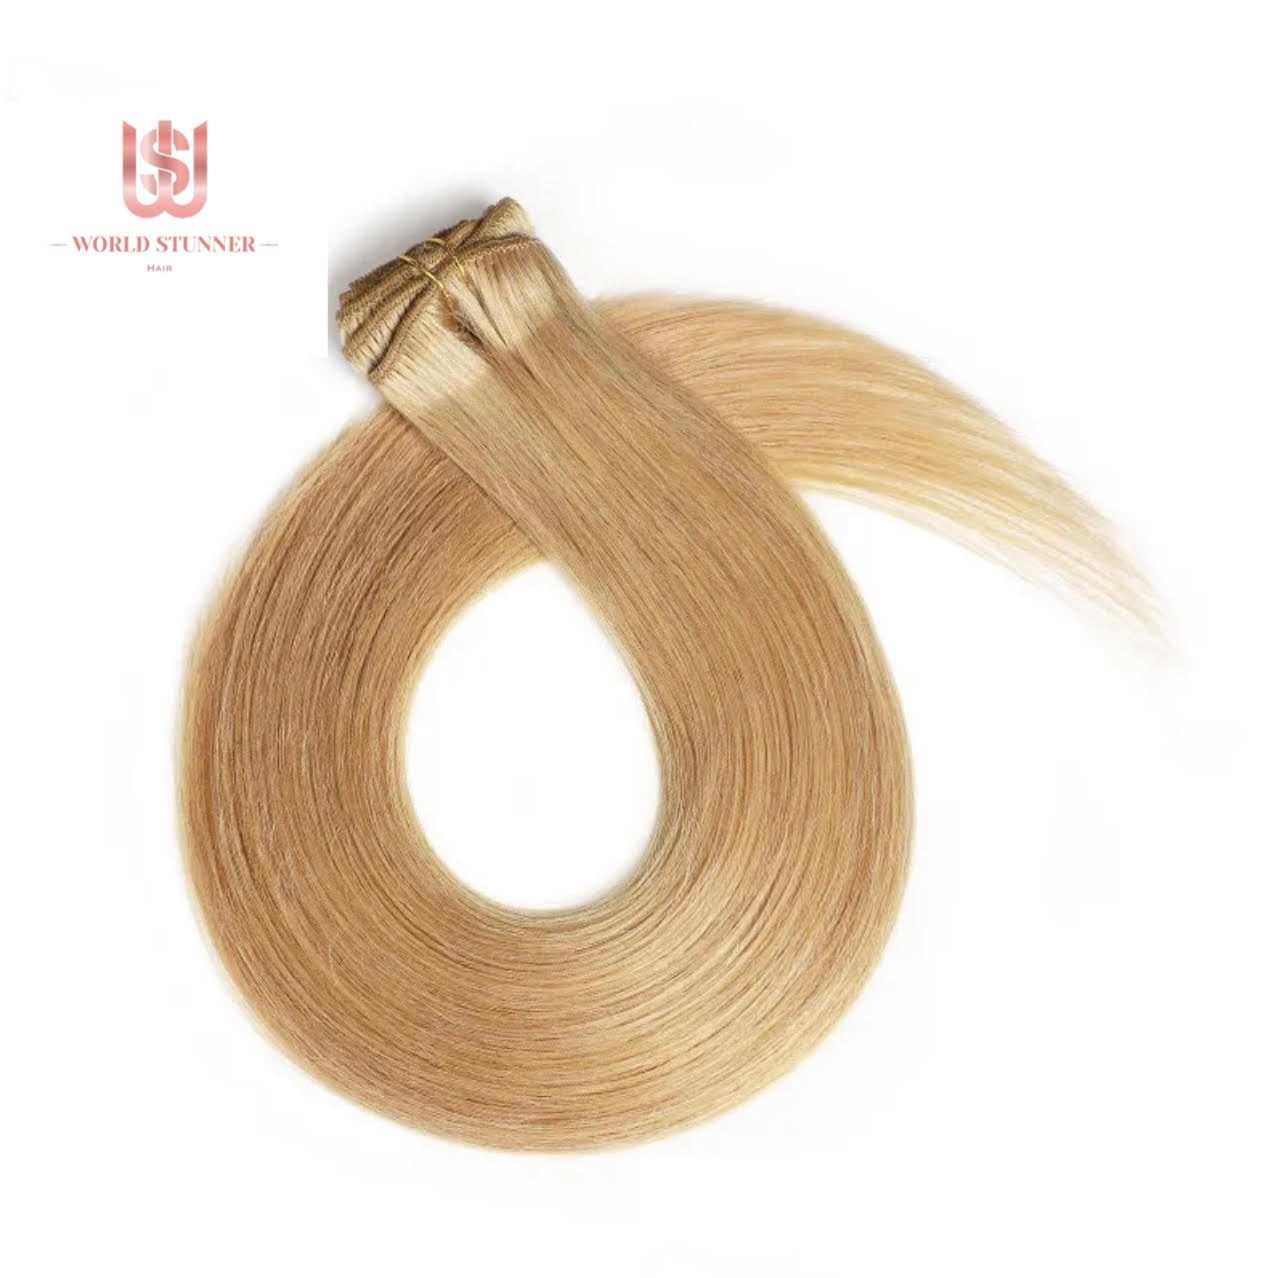 27 BLONDE - SUPER THICK 22” 7 PIECE STRAIGHT CLIPS IN HAIR EXTENSIONS